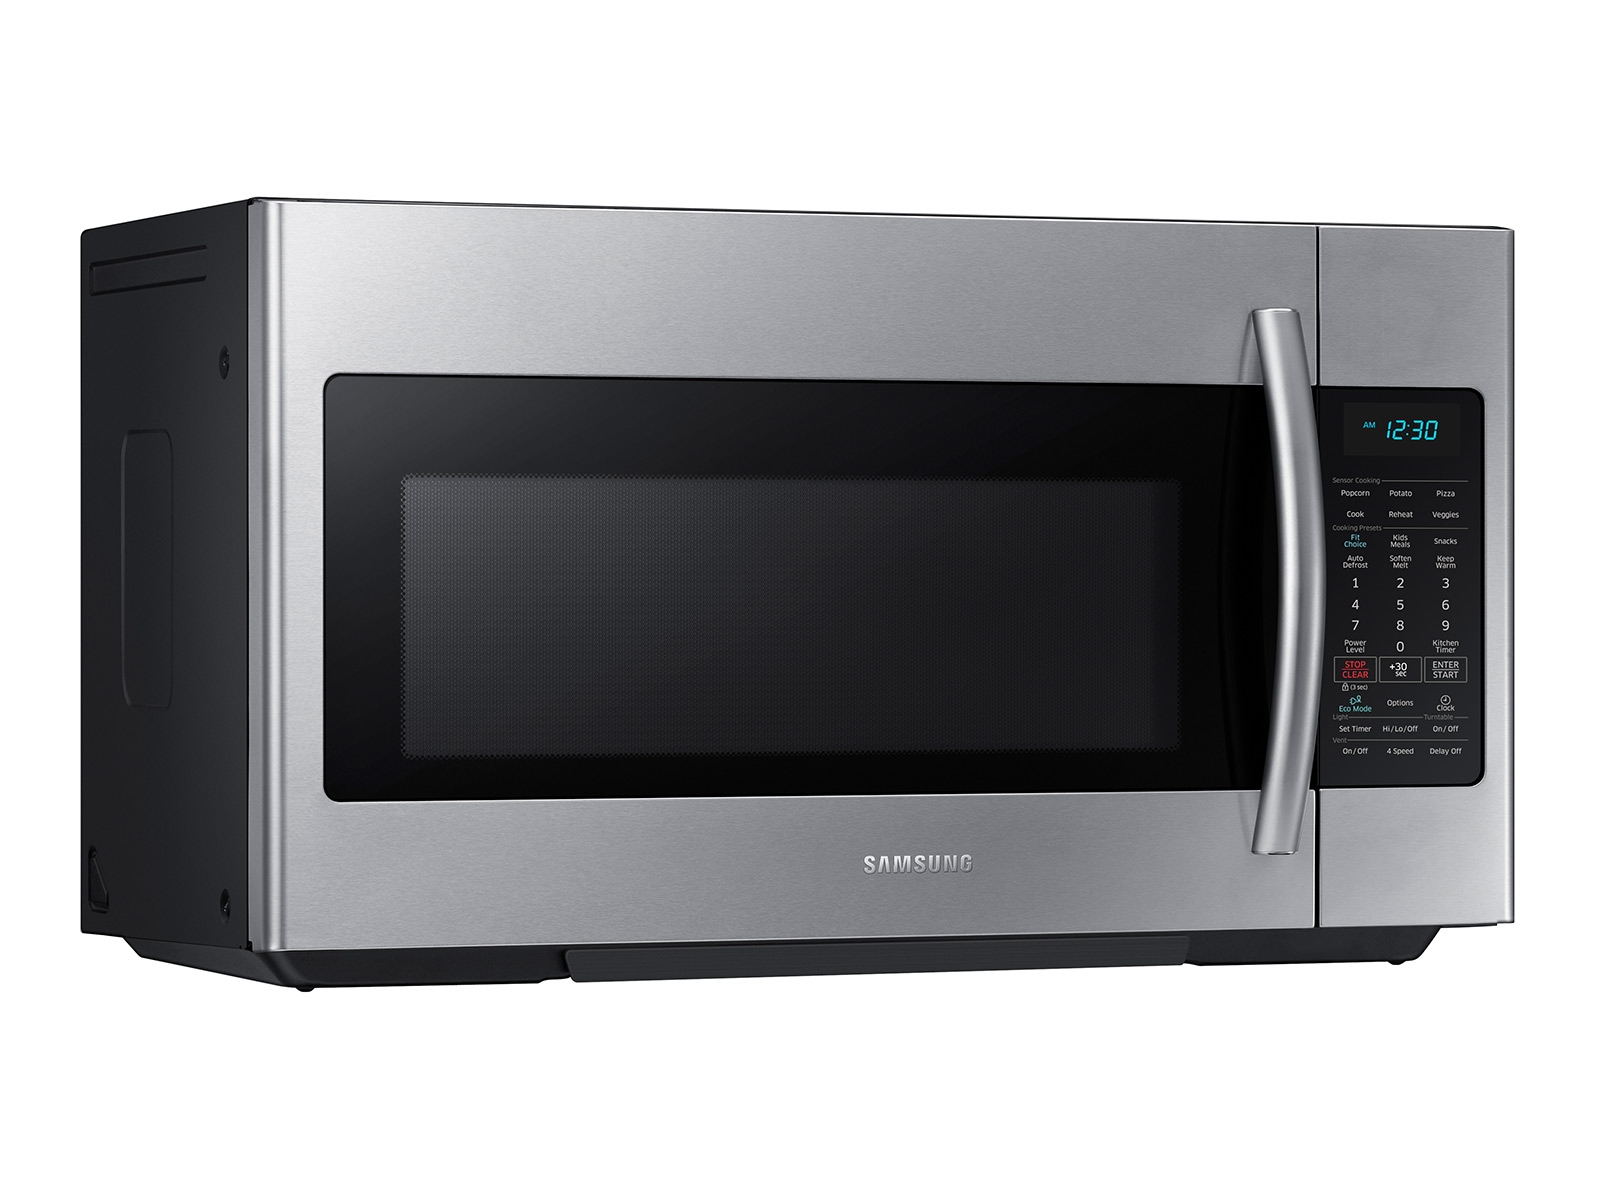 https://image-us.samsung.com/SamsungUS/home/home-appliances/microwaves/over-the-range/pdp/me18h704sfs/gallery/10_Microwave_OTR_ME18H704SFS_L-Perspective_Silver.jpg?$product-details-jpg$